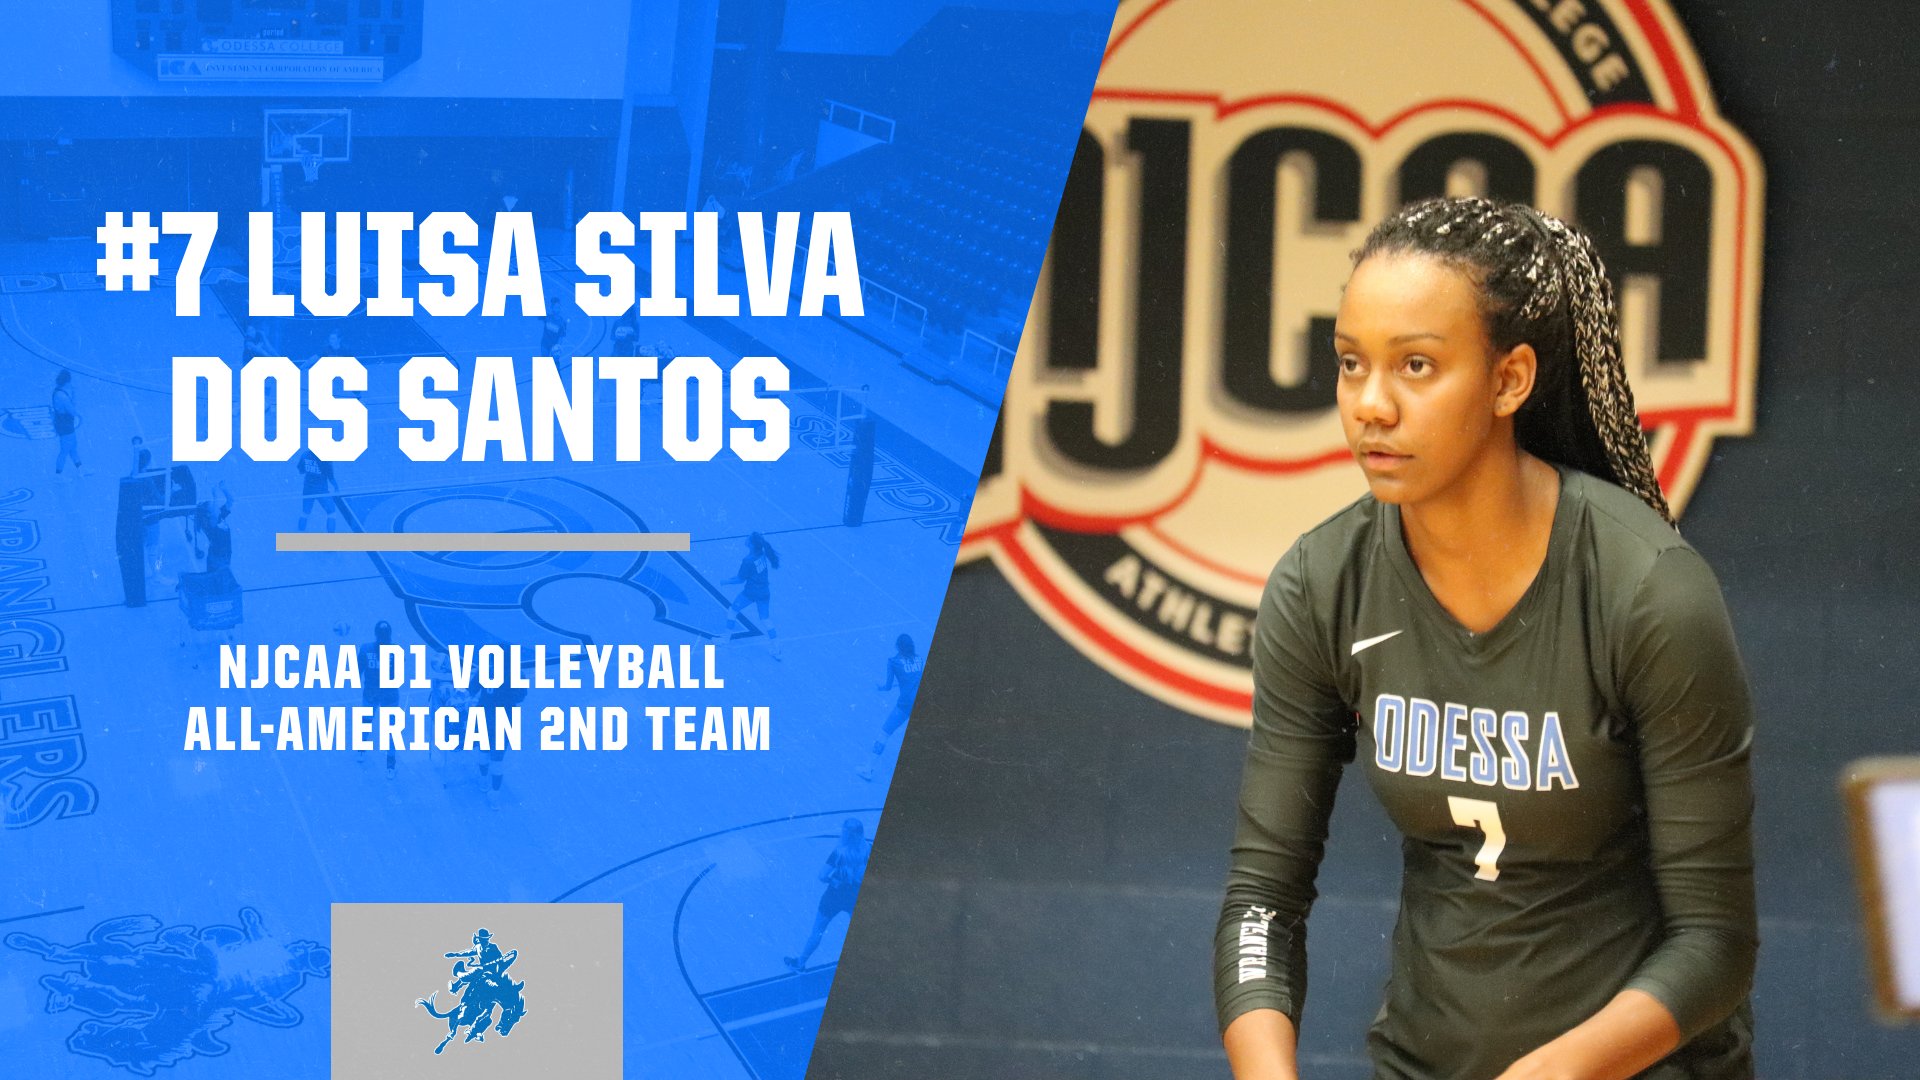 Silva Dos Santos named to NJCAA D1 Volleyball All-American Team